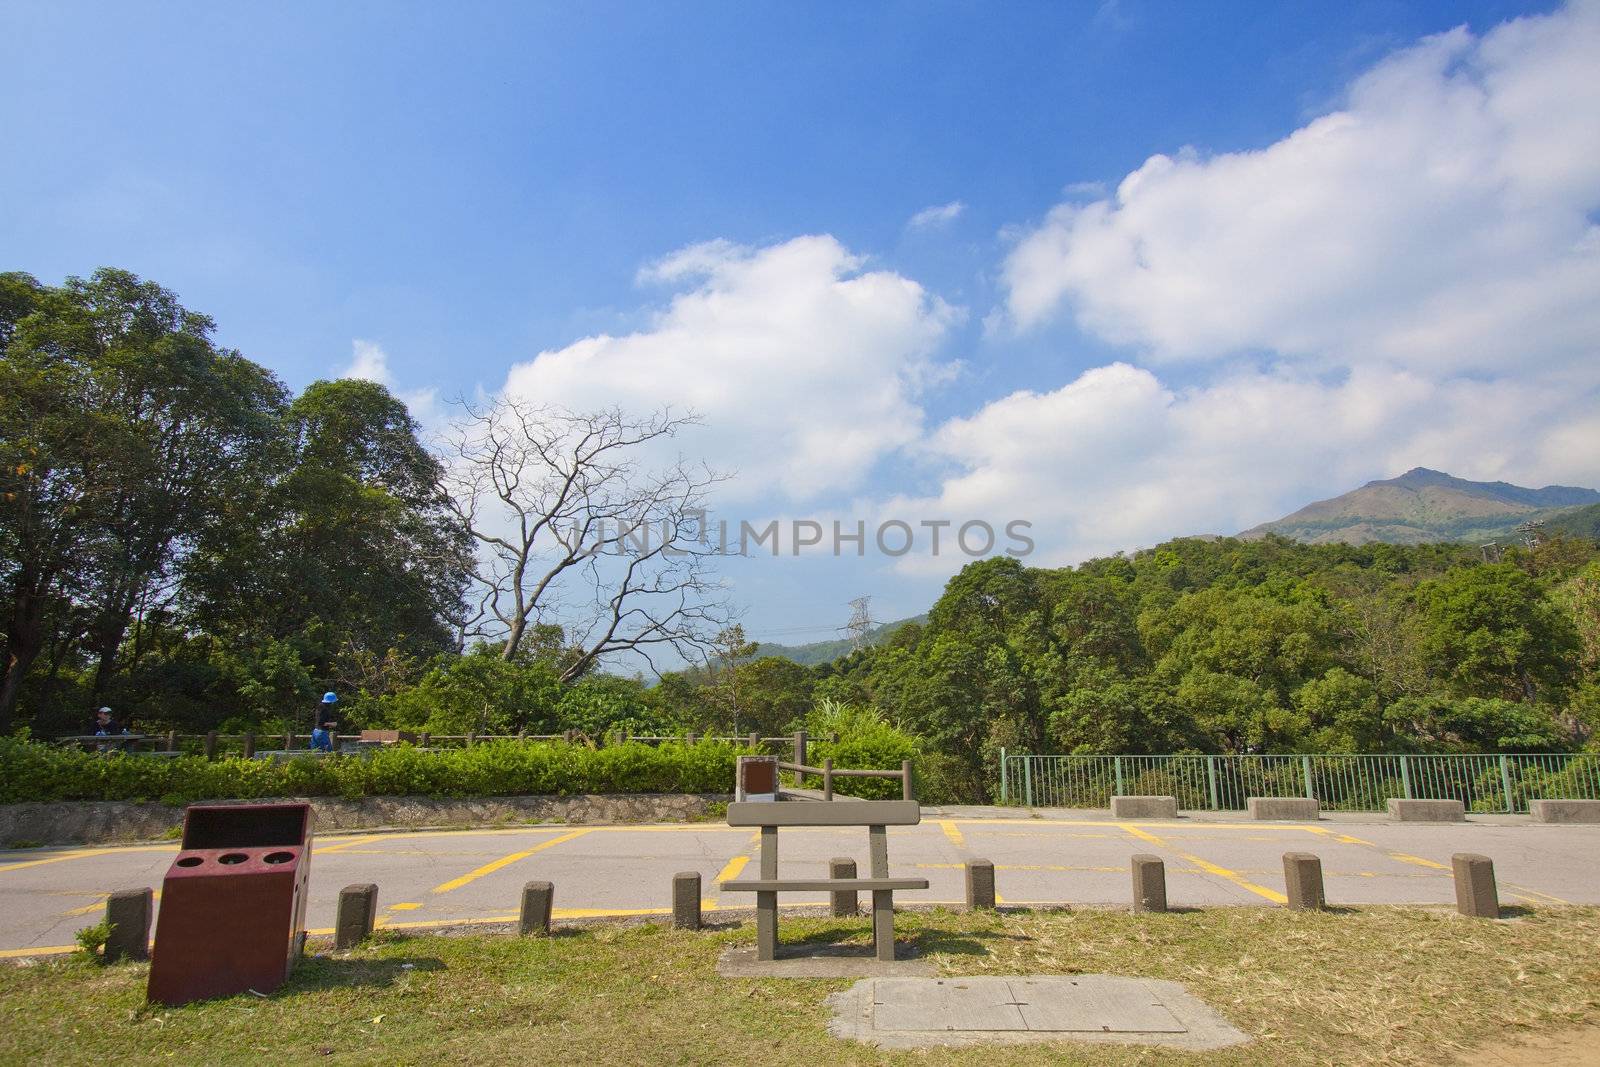 Hong Kong country park, there are 24 country parks in this city.